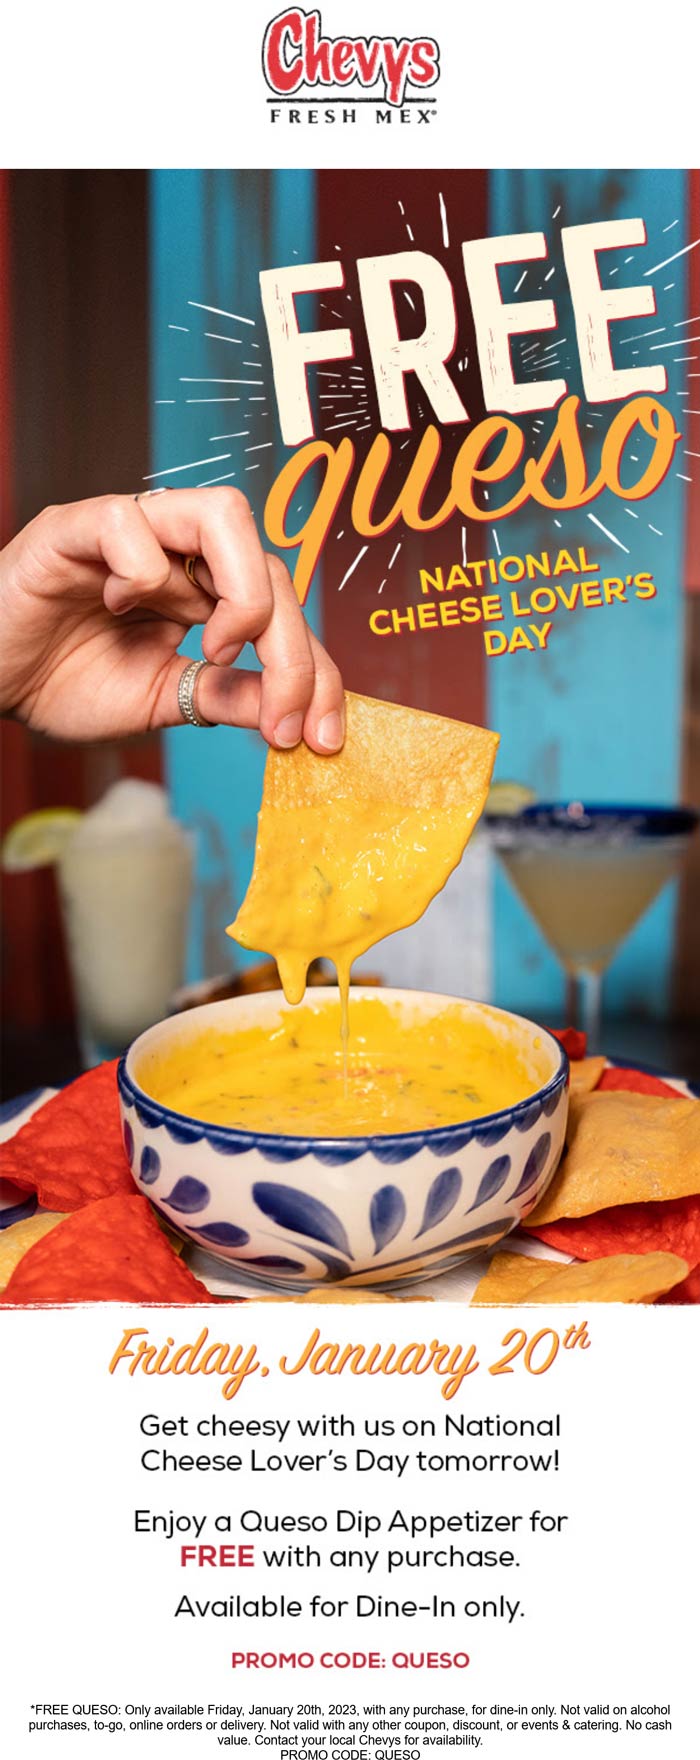 Chevys restaurants Coupon  Free queso today at Chevys Fresh Mex restaurants #chevys 